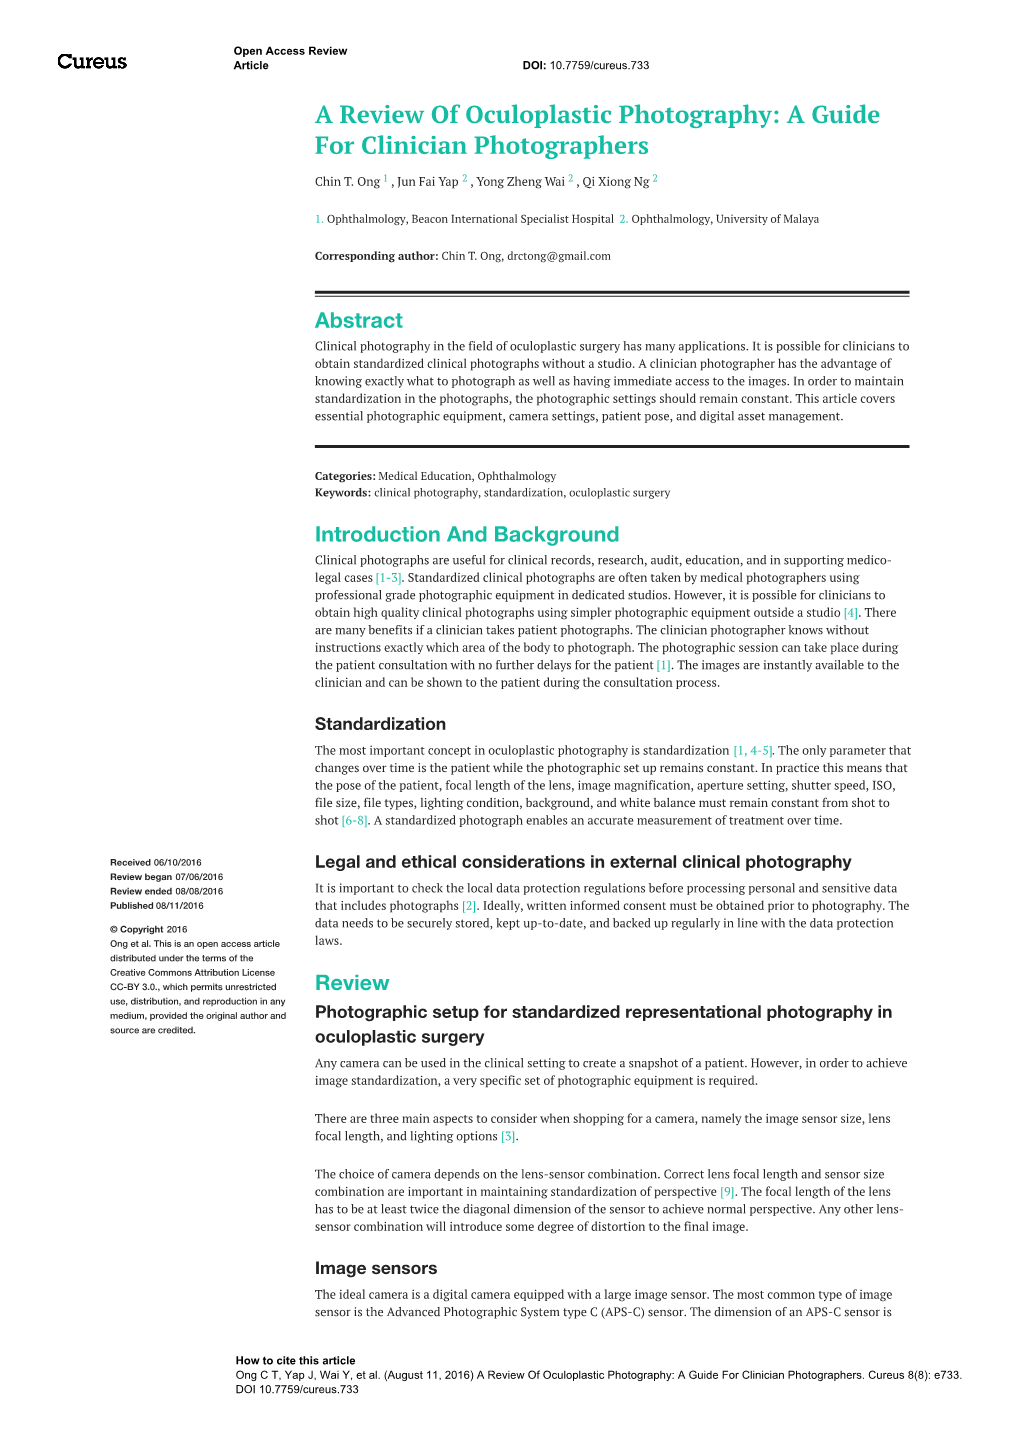 A Review of Oculoplastic Photography: a Guide for Clinician Photographers